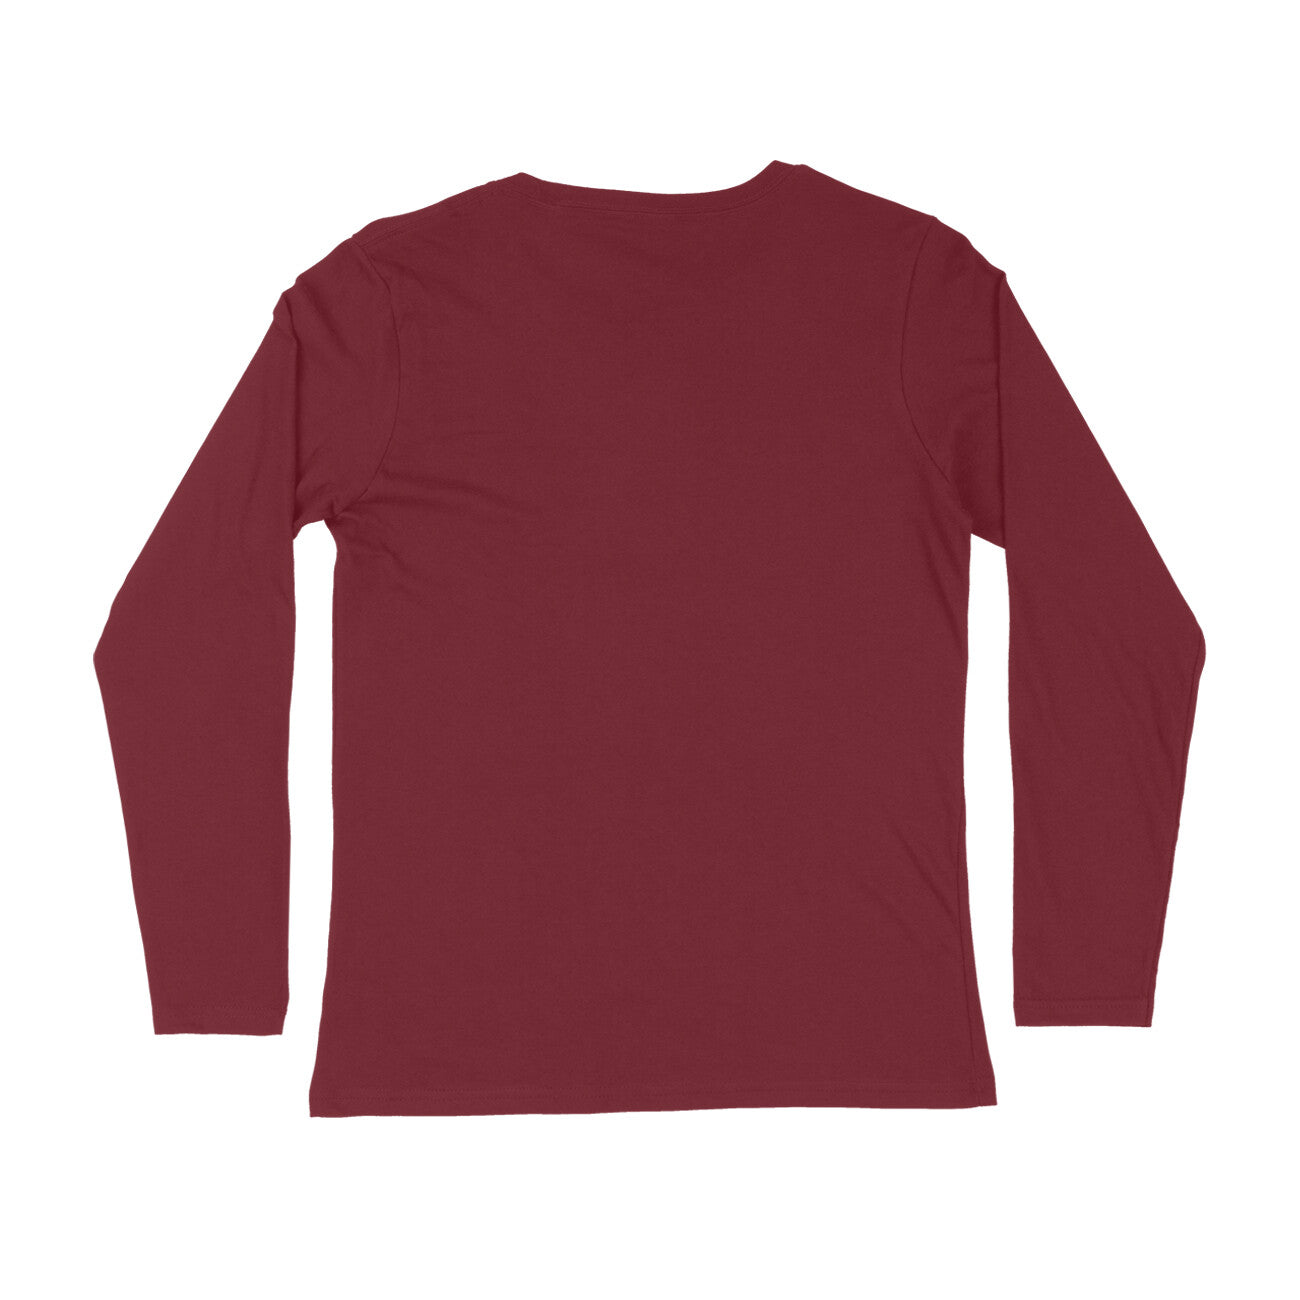 Never Give Up - Men's Maroon Full Sleeve T-shirt